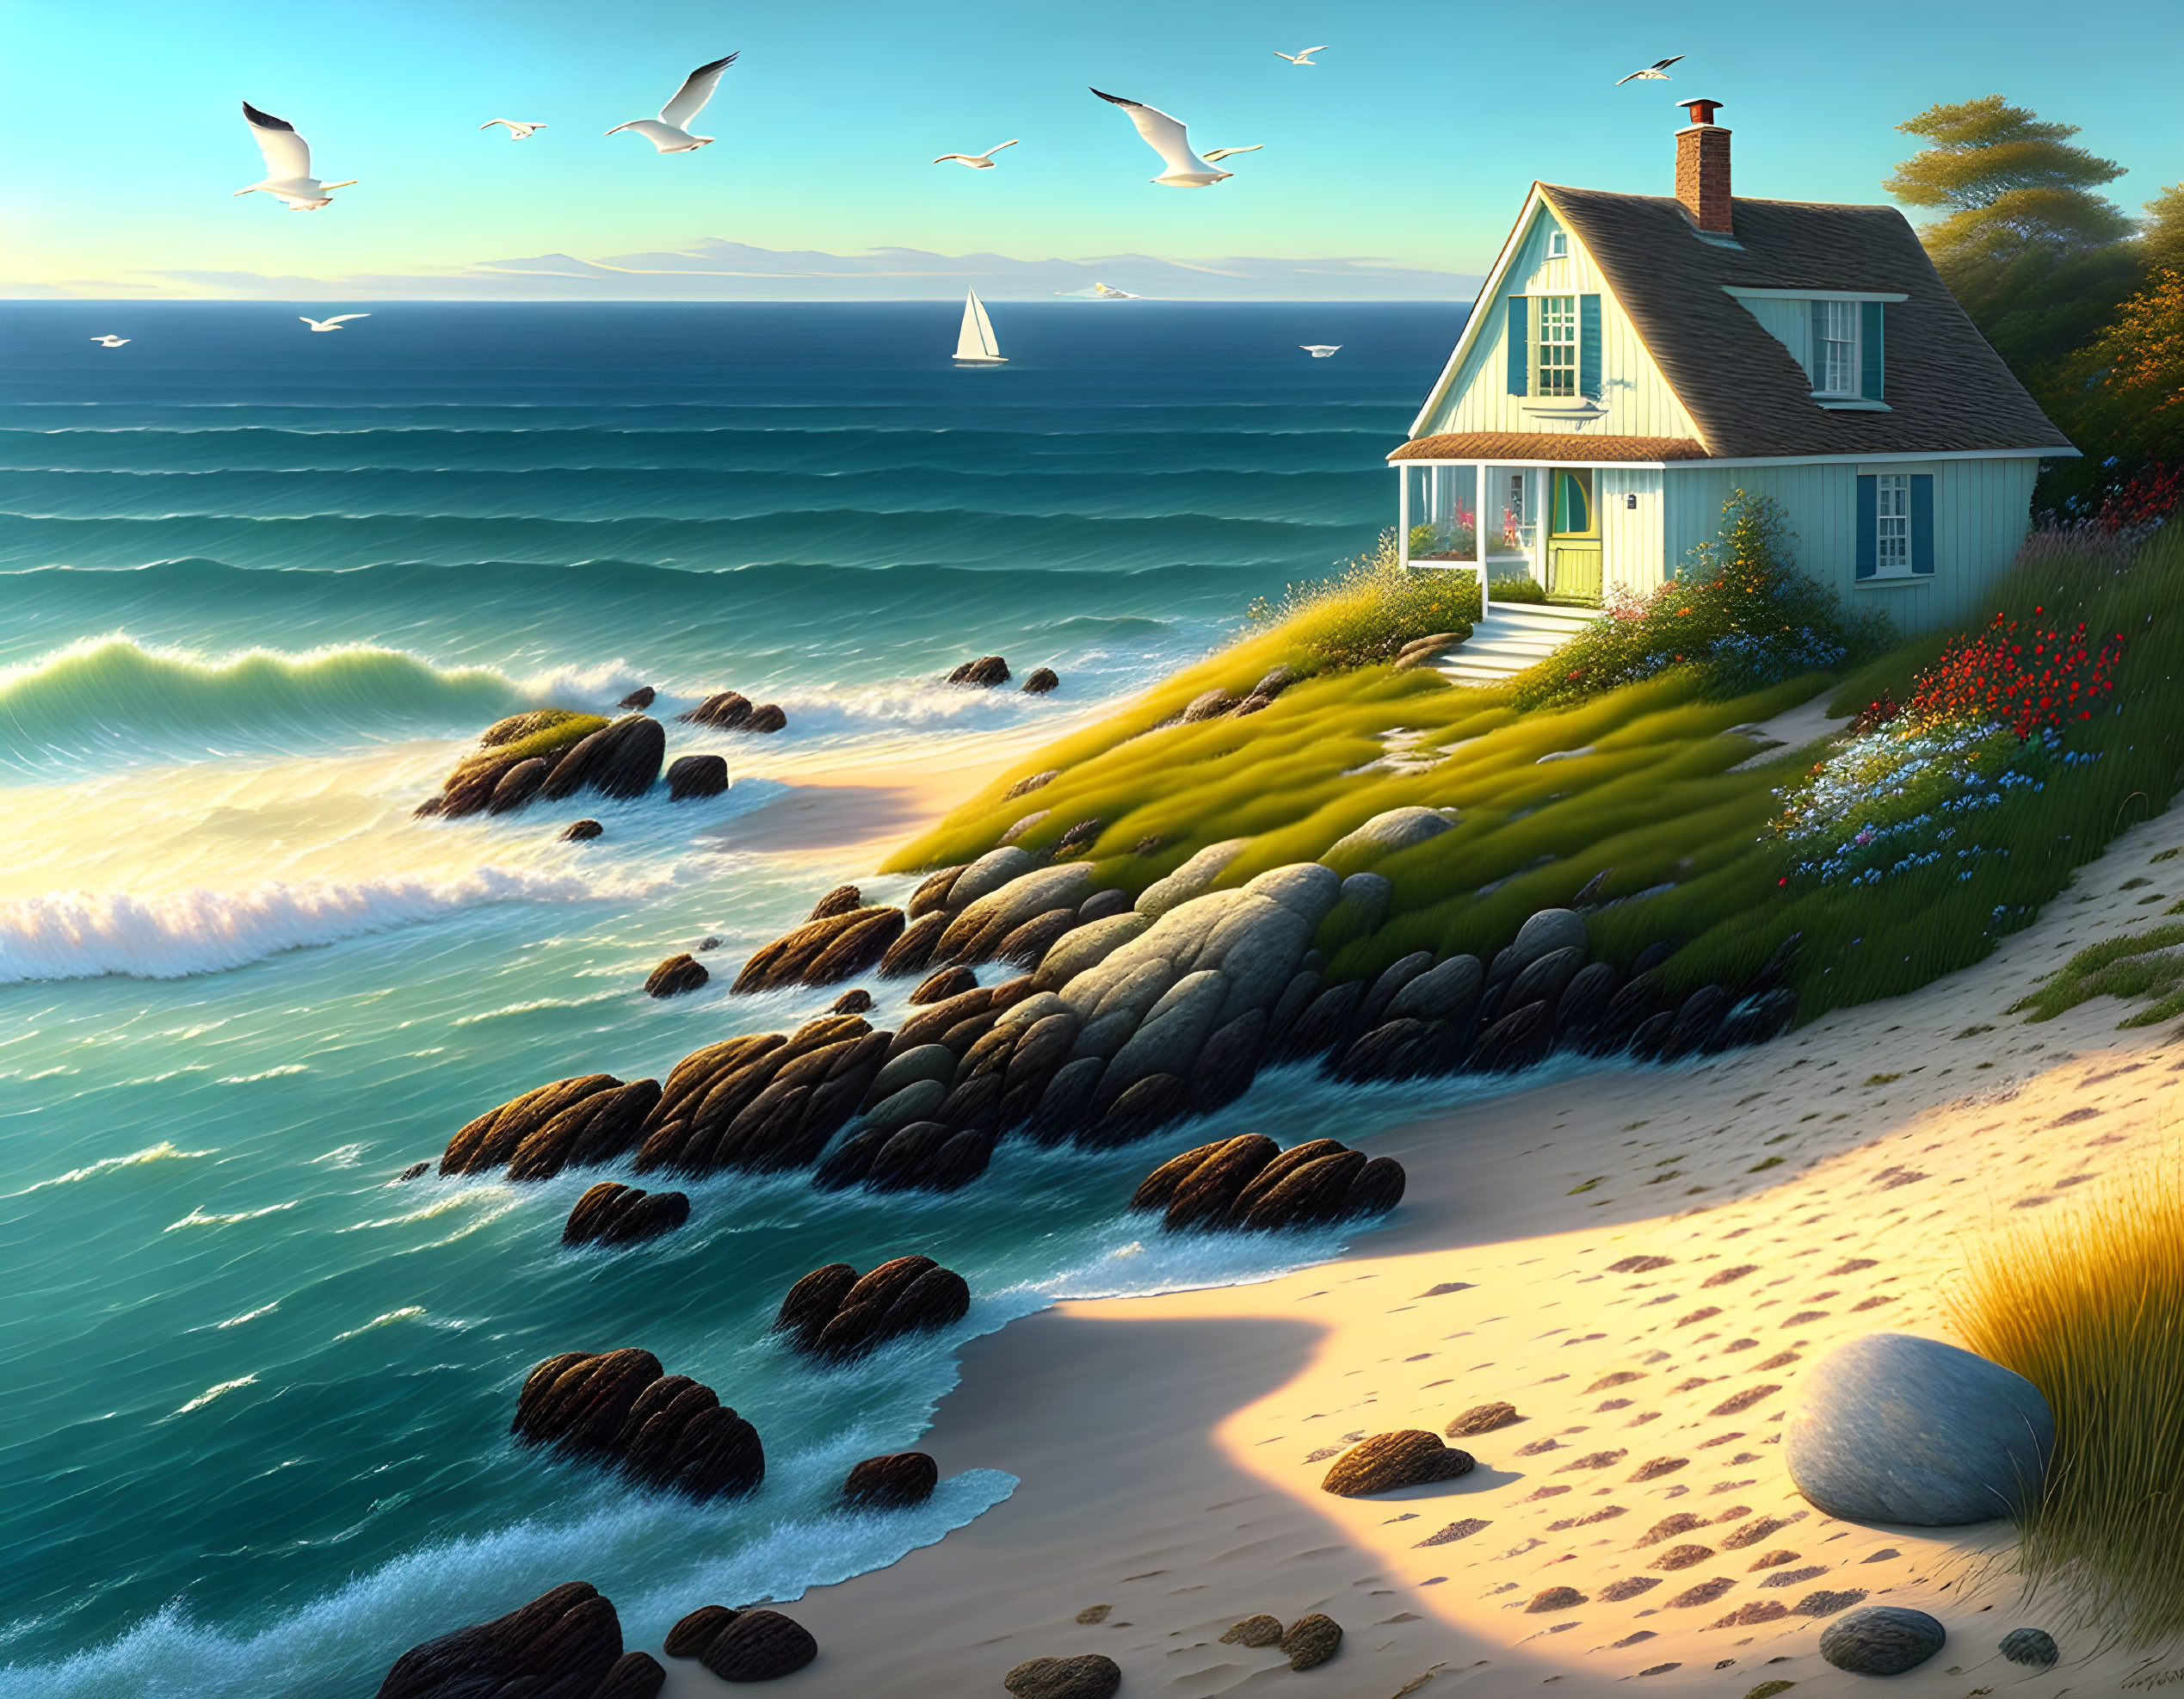 Blue house on seaside cliff with crashing waves, seagulls, and sailboats